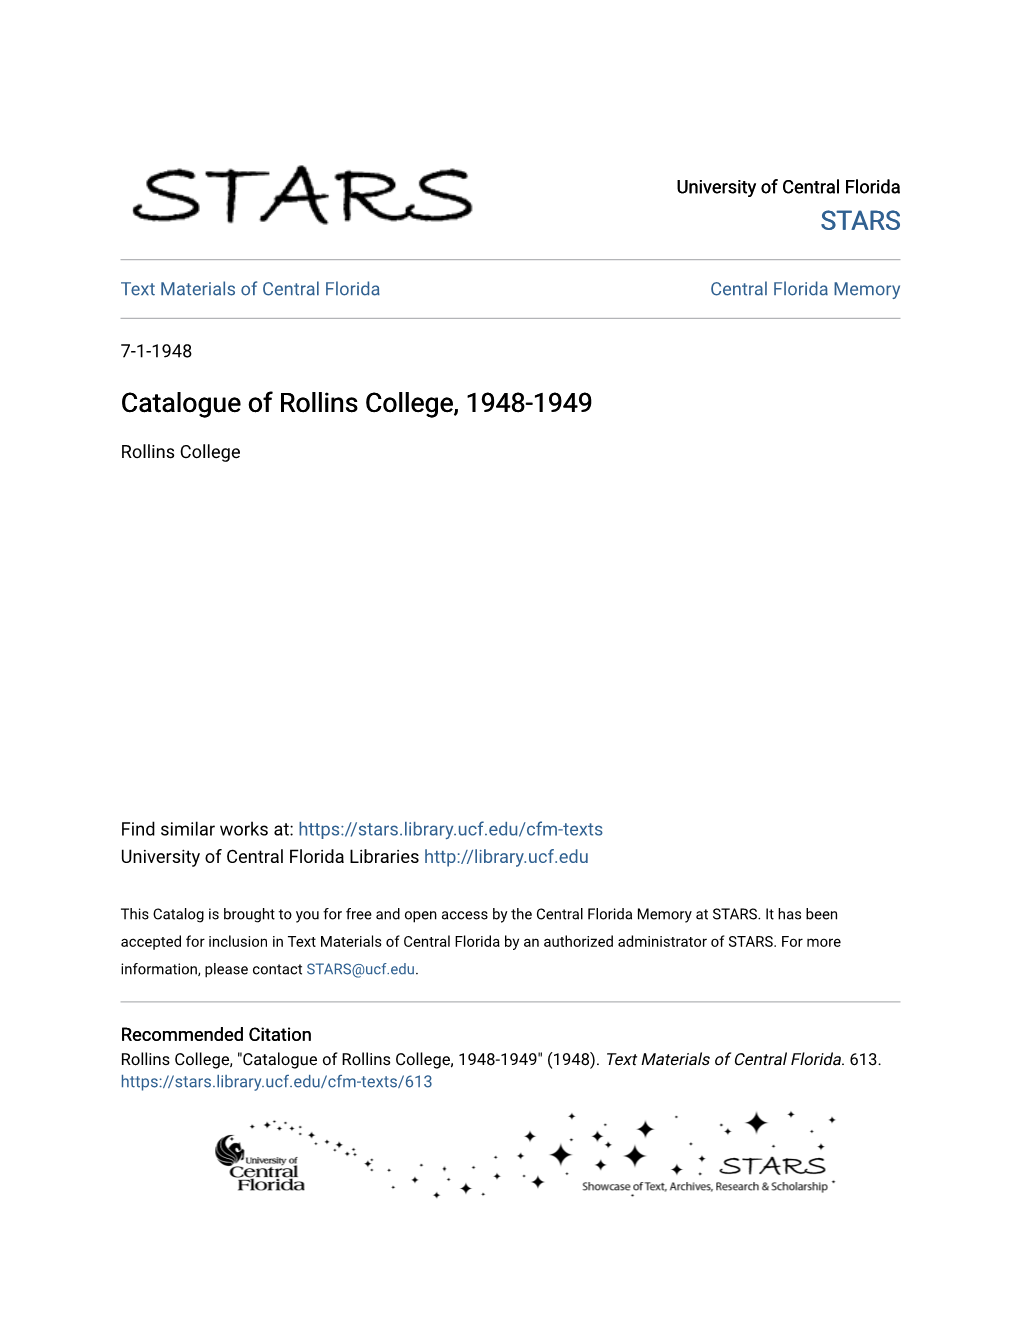 Catalogue of Rollins College, 1948-1949